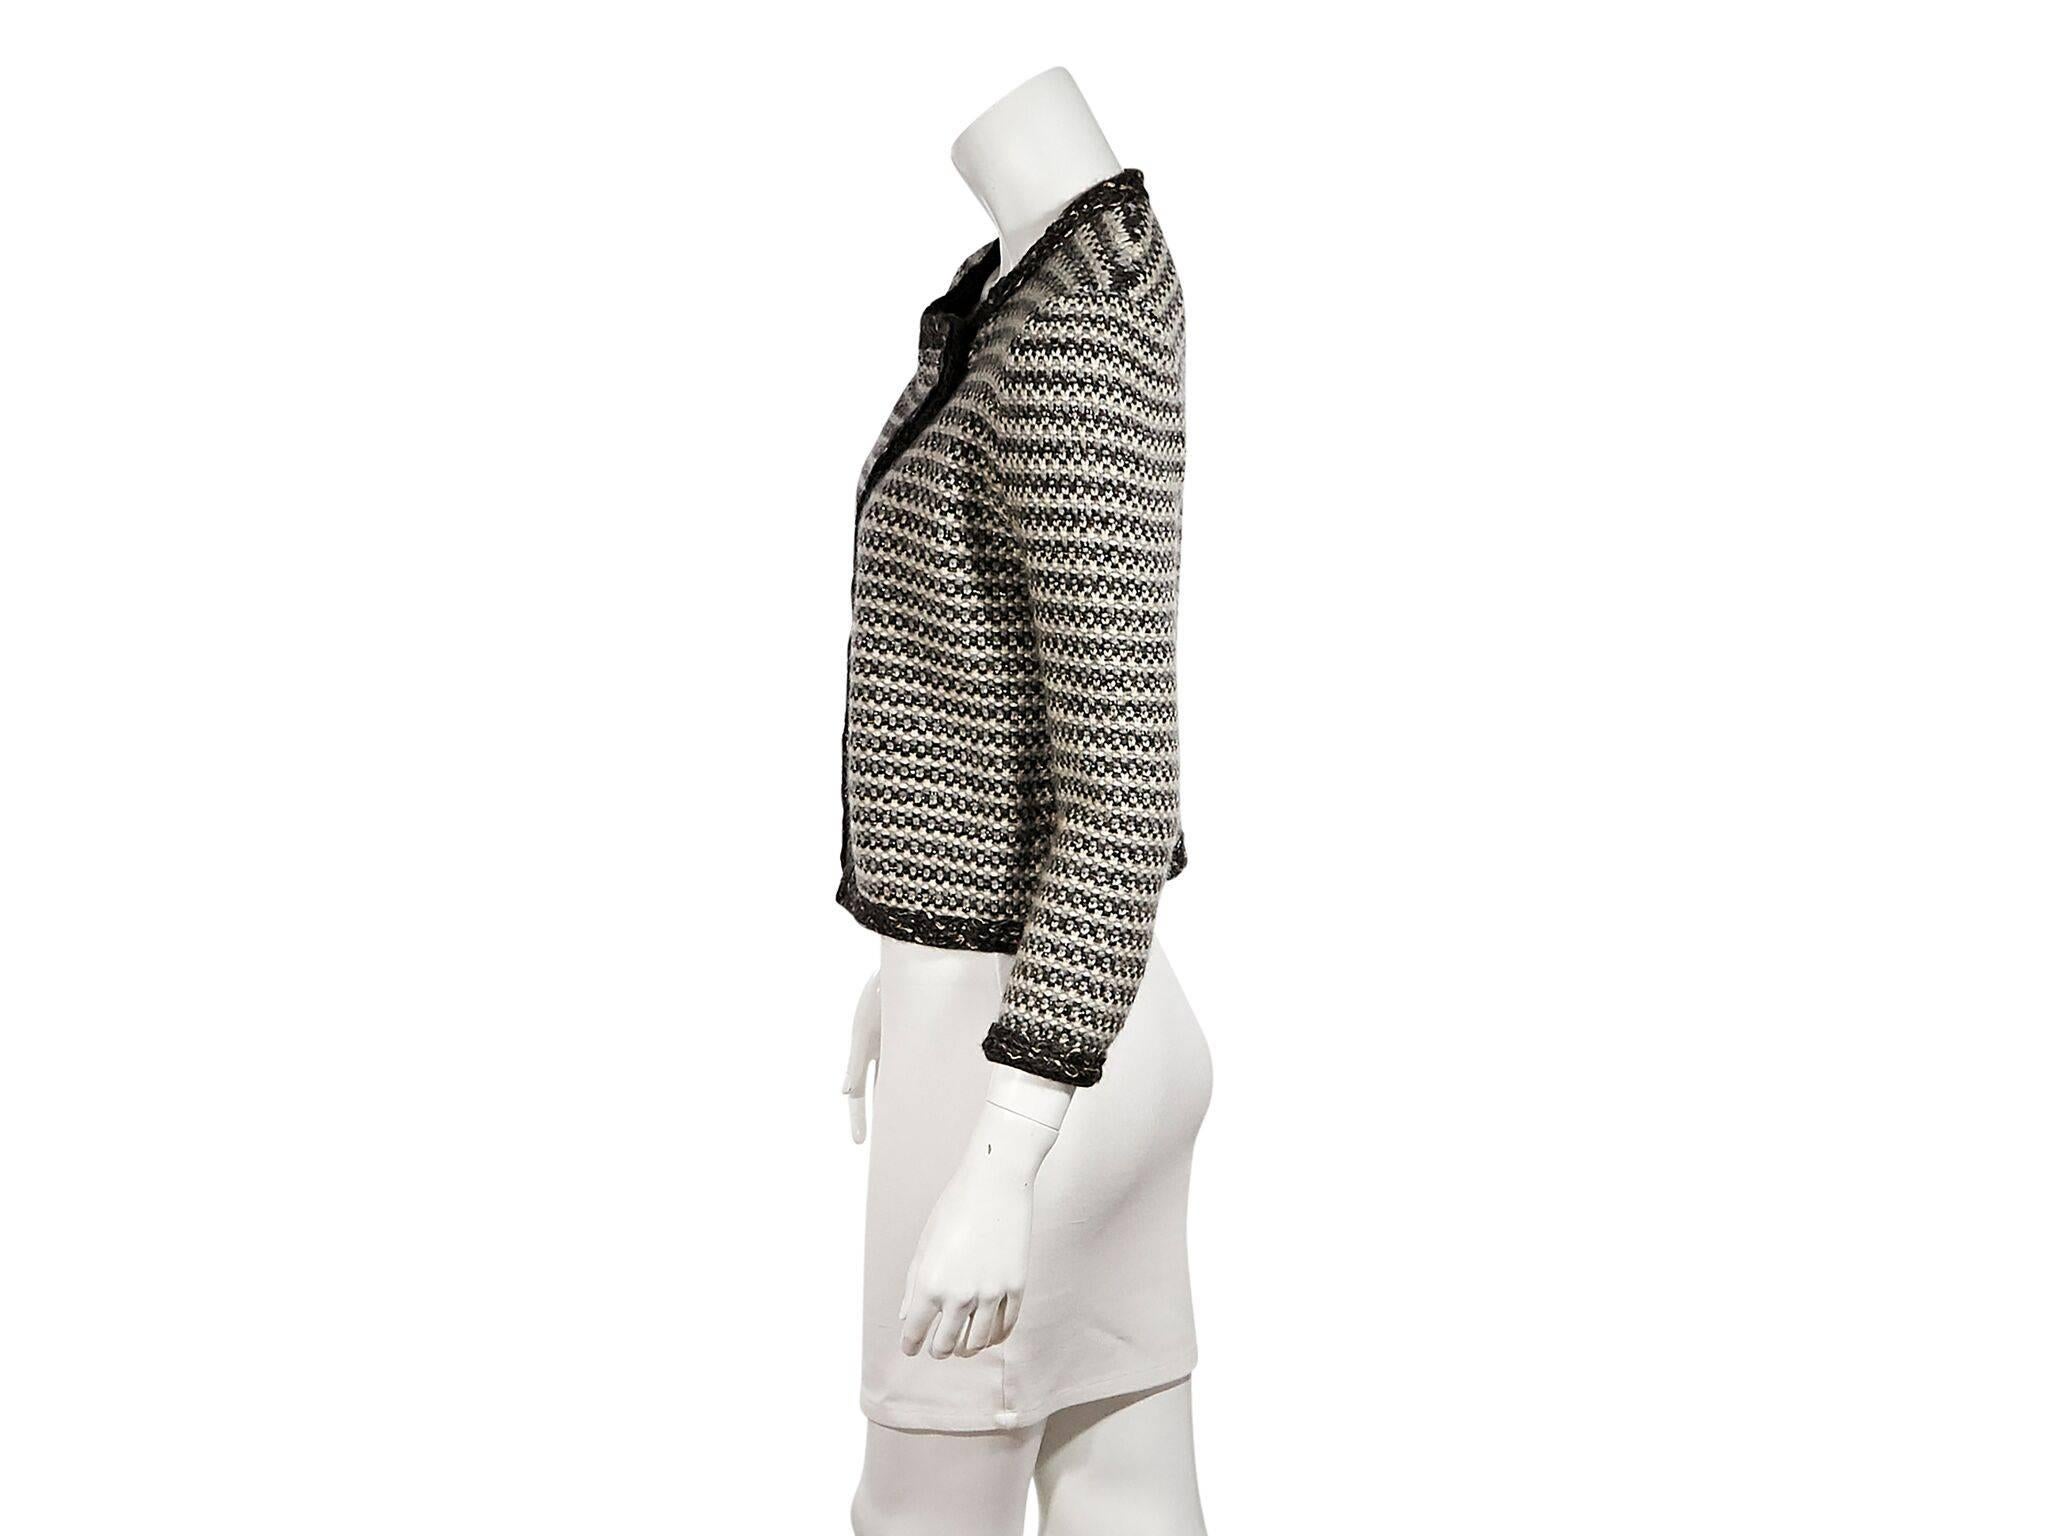 Product details:  Multicolor woven striped cashmere-blend cardigan by Chanel.  Jewelneck.  Three-quarter length sleeves.  Crossover double-breasted button closure.  Label size FR 38.  38